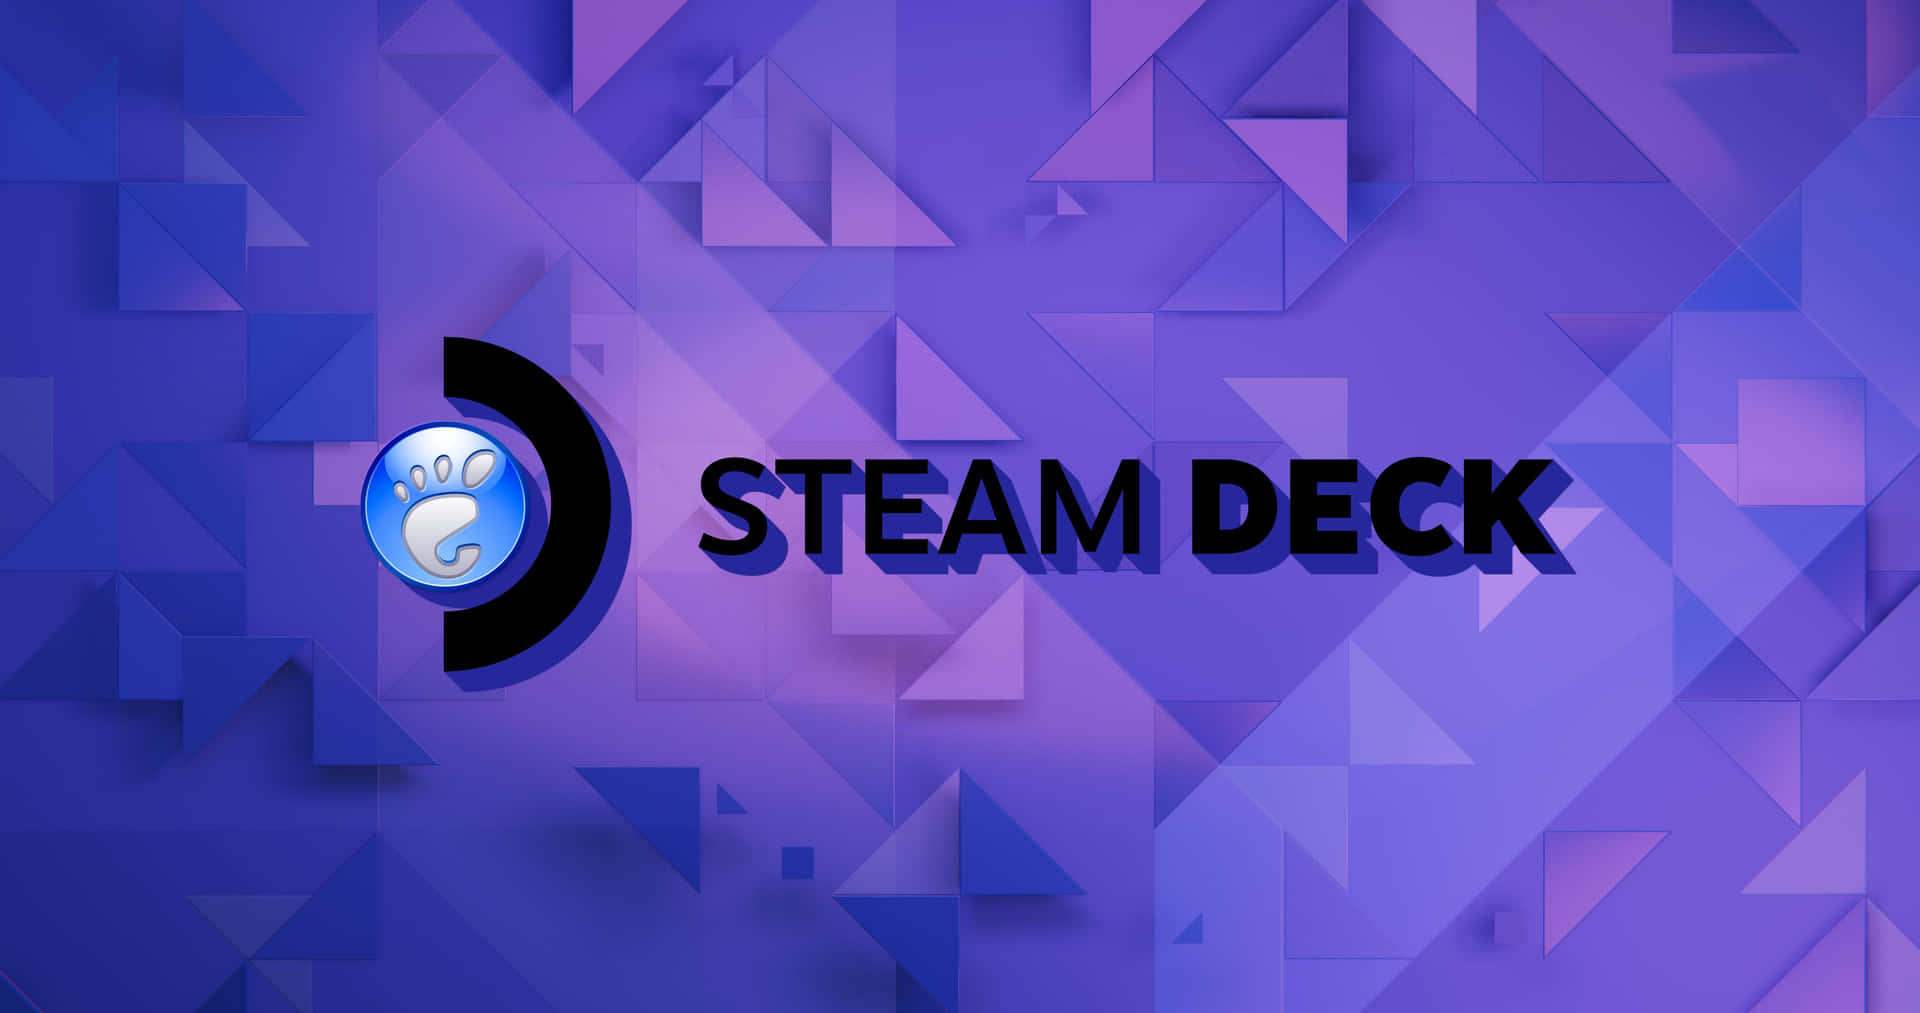 Steam Deck Promotional Graphic Wallpaper